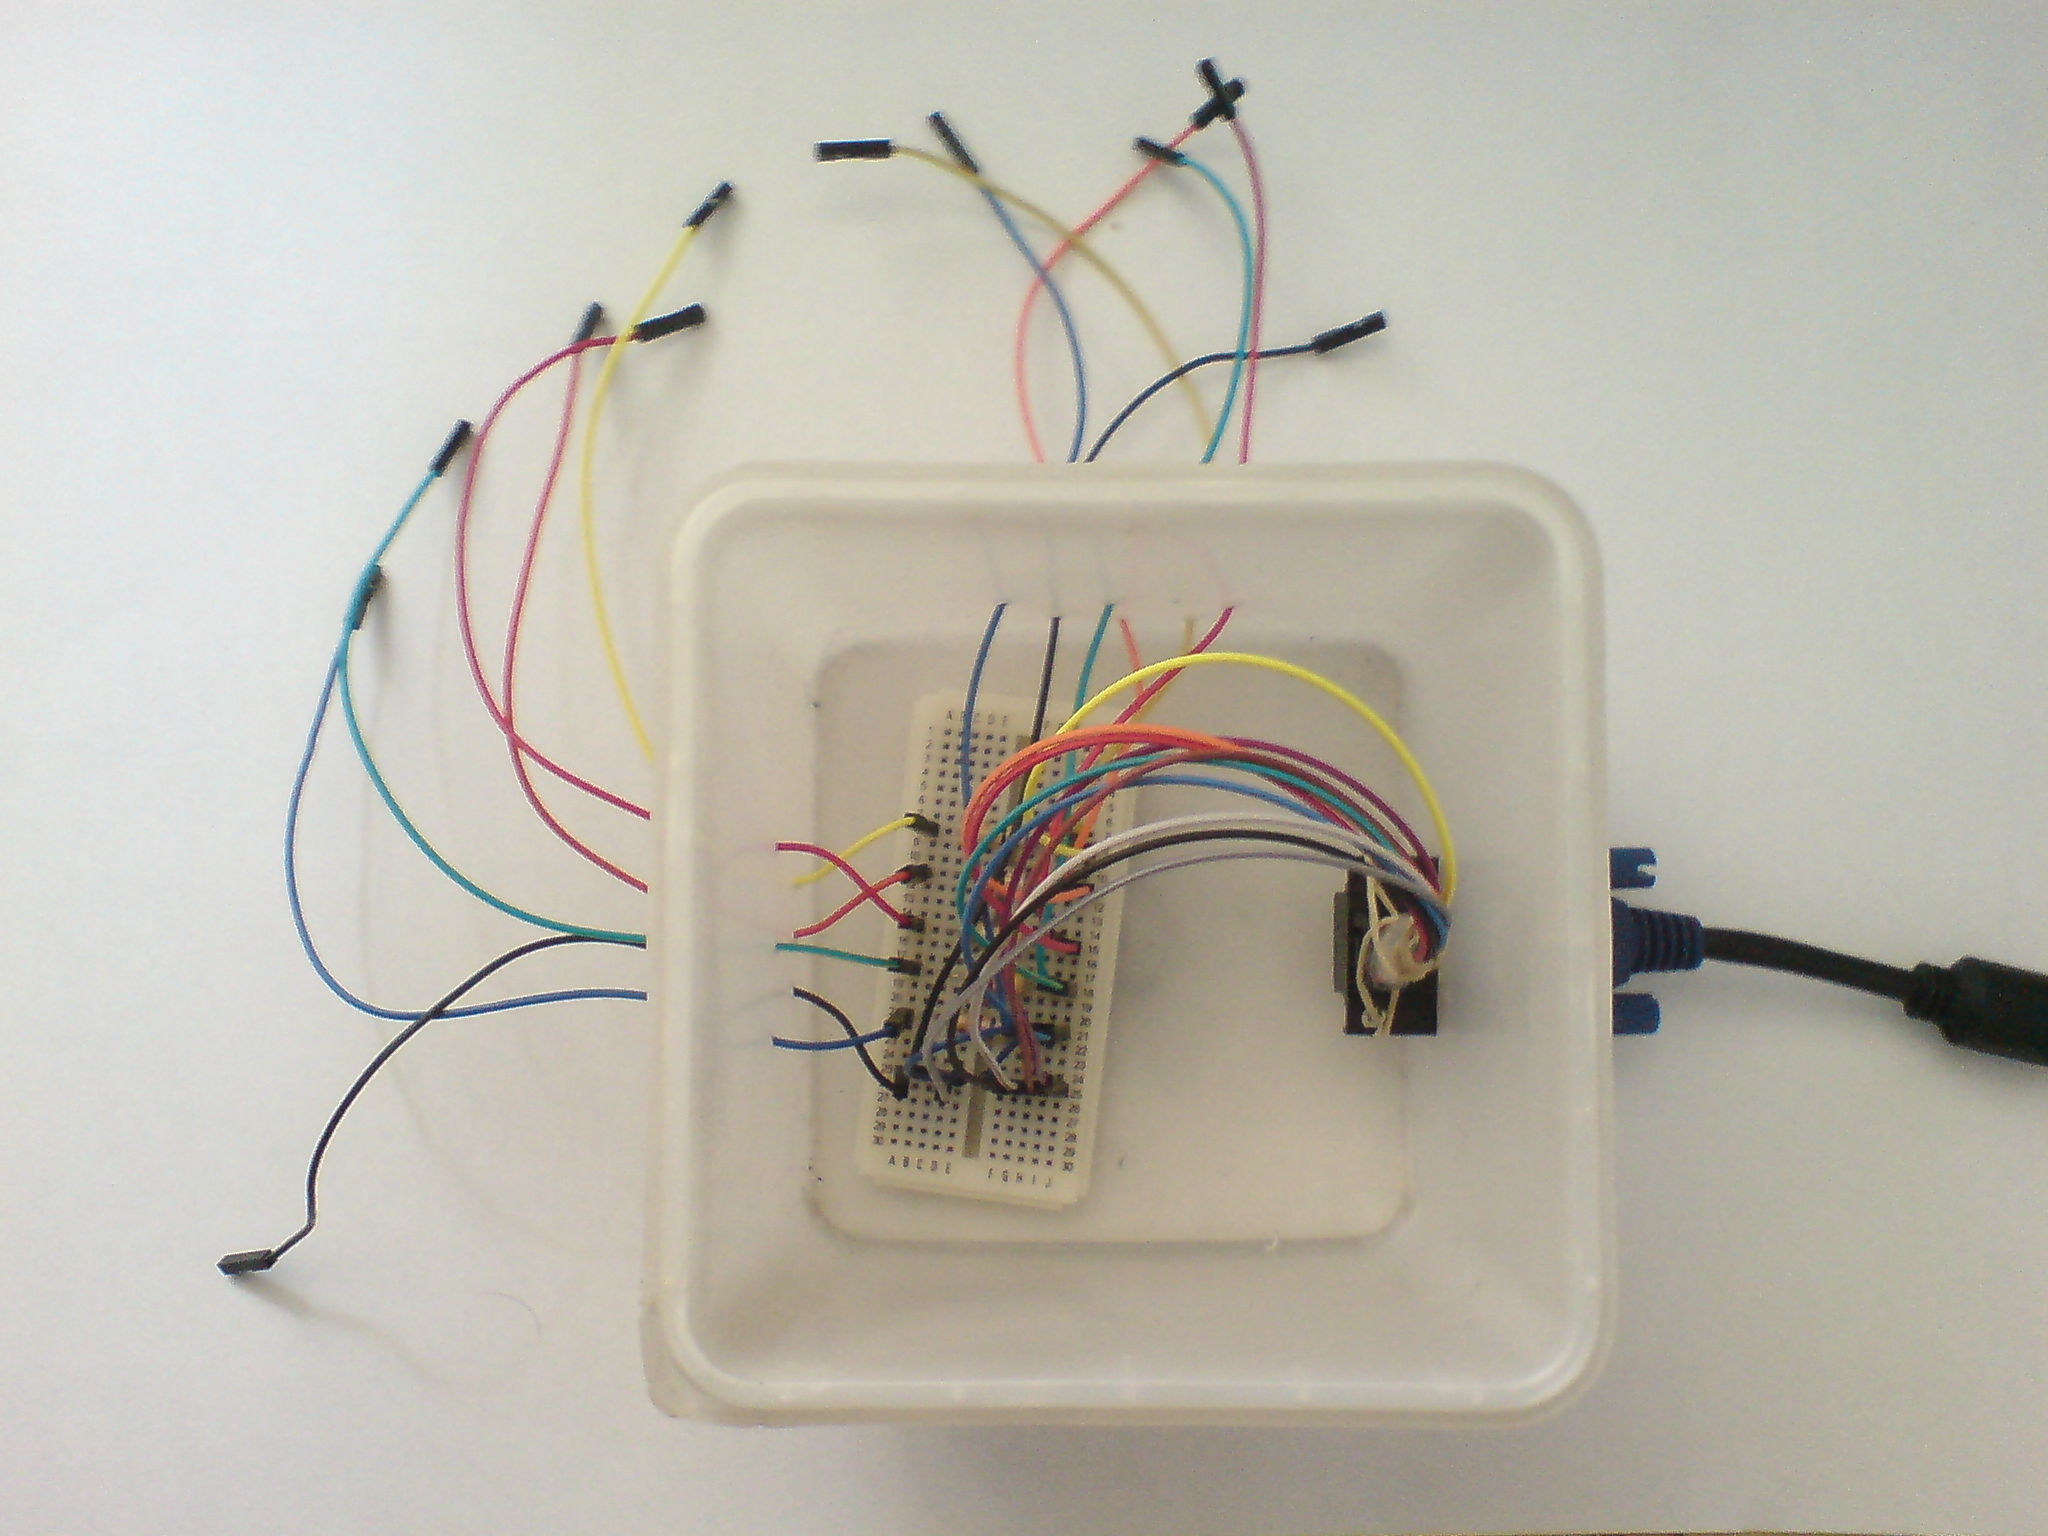 From breadboard to female connectors